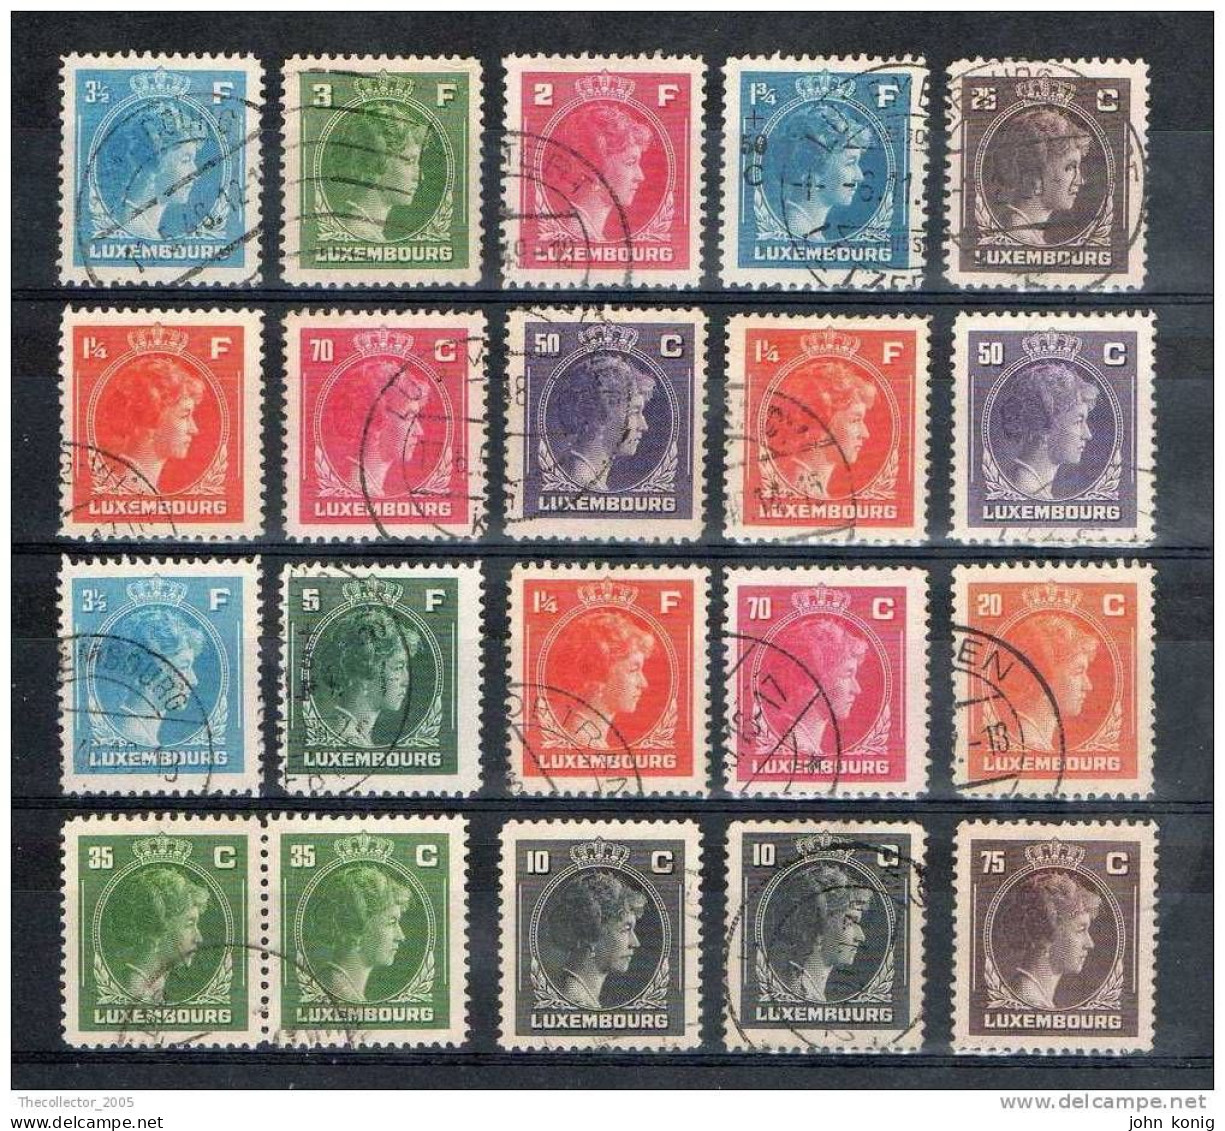 Luxembourg - Lussemburgo - Stamps Lot - Timbres Beaucoup - Menge Briefmarken - Sellos Mucho - Collections